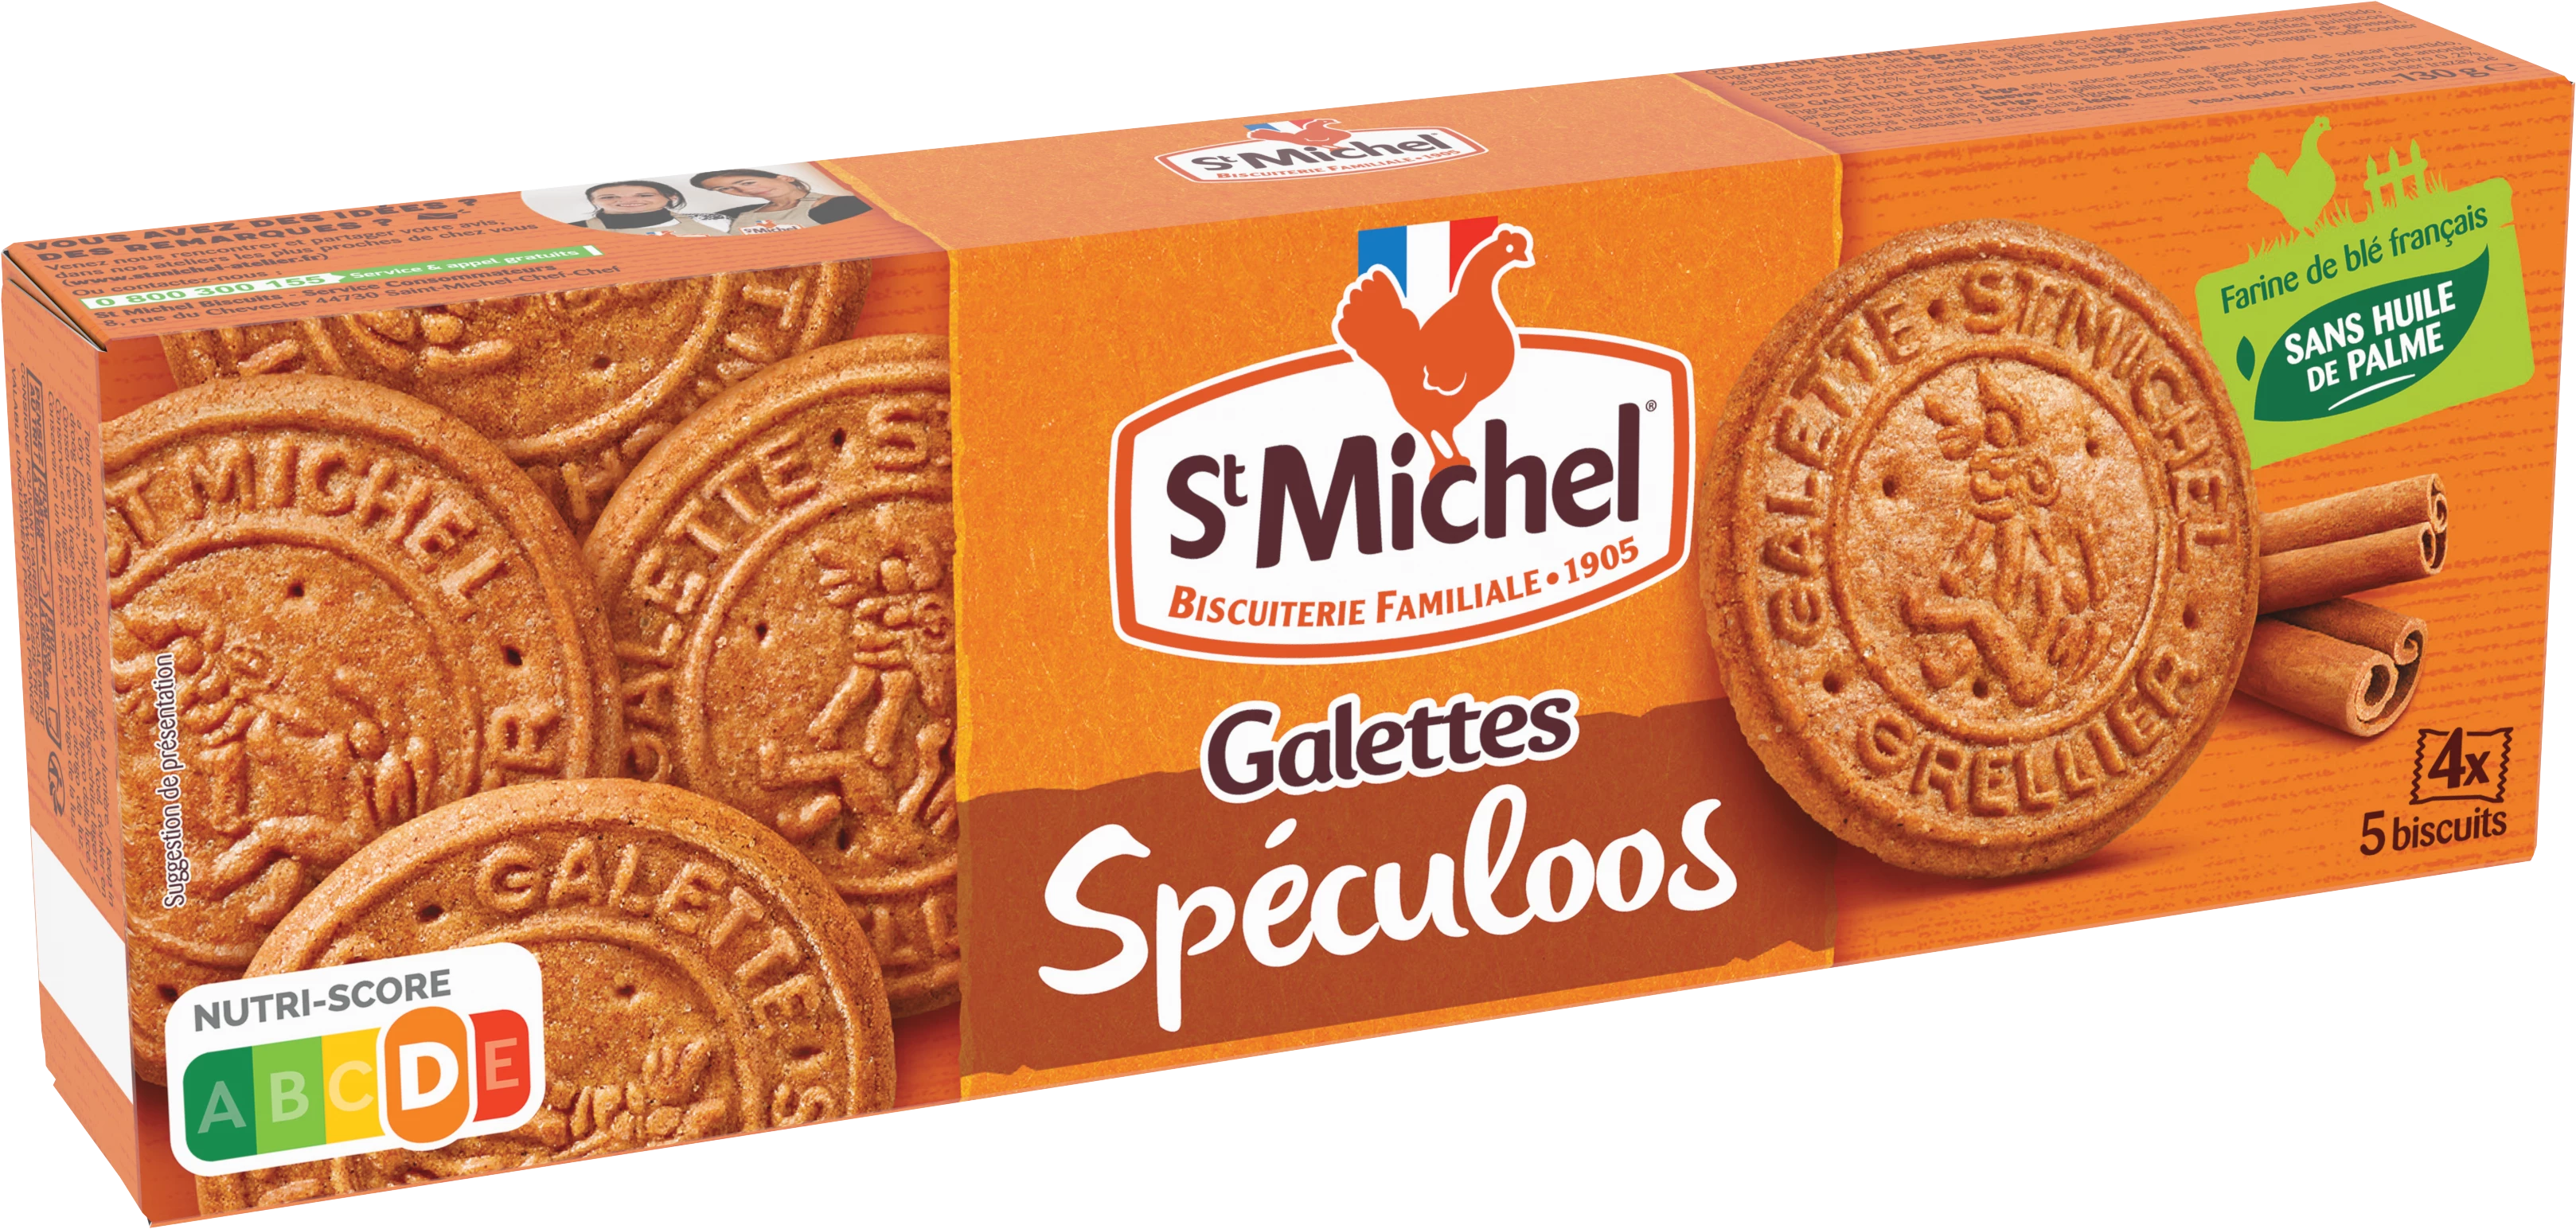 Panquecas Speculoos 130g - ST MICHEL